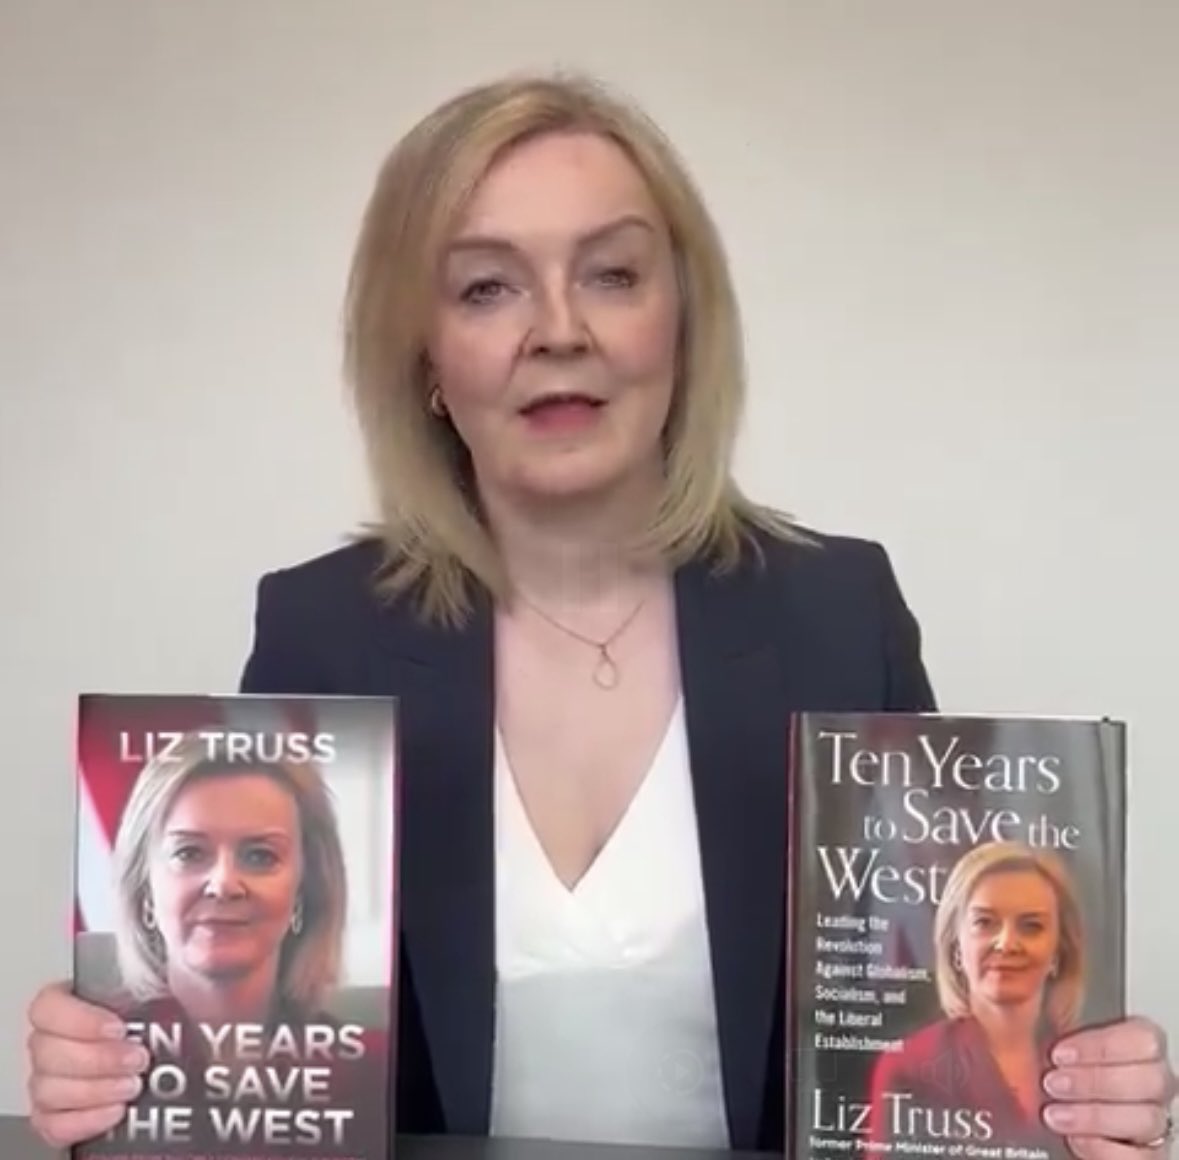 I think Liz Truss book should be turned into a TV sitcom titled “Dense, Delusional, And Desperate” With Truss played by Sally Phillips playing a washed up vacuous, narcissistic, gormless disaster of an ex PM Who doesn’t realise how thick she is… What d’ya reckon❓ 🤷🏼‍♂️😁